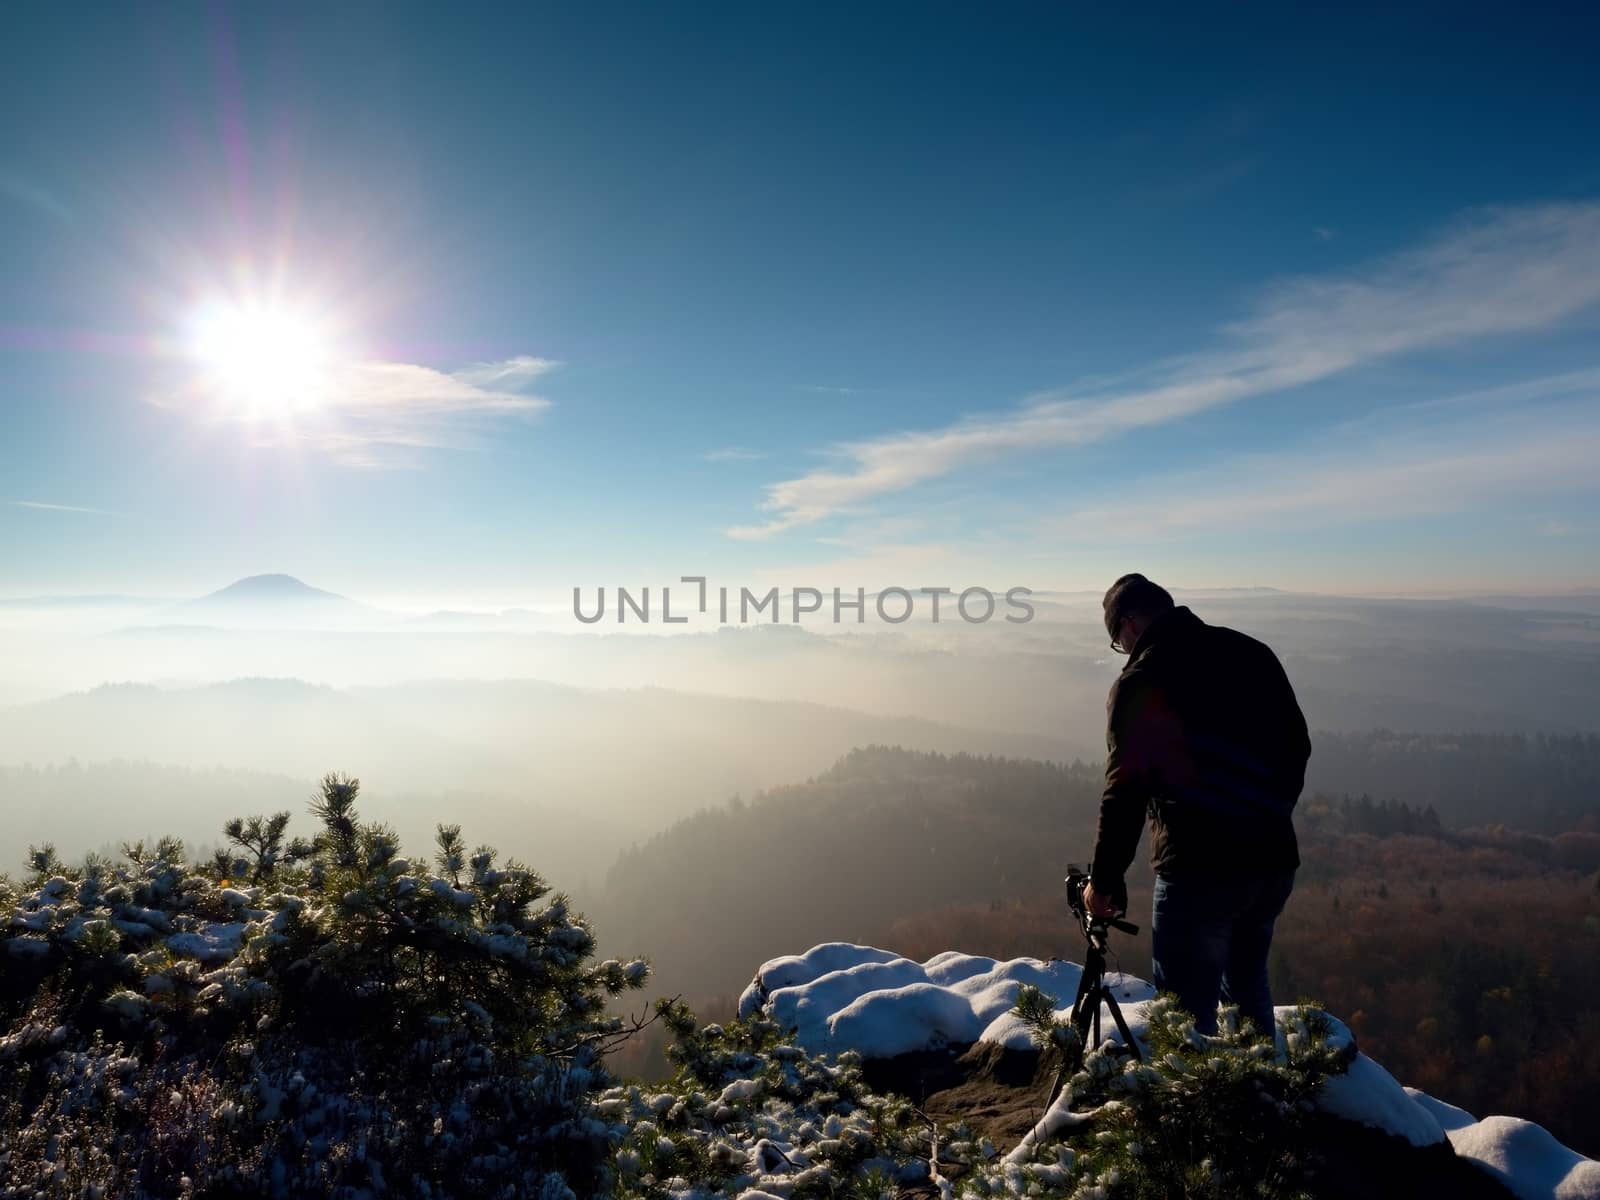 Man takes photos with camera on sharp rock. Dreamy fogy landscape by rdonar2